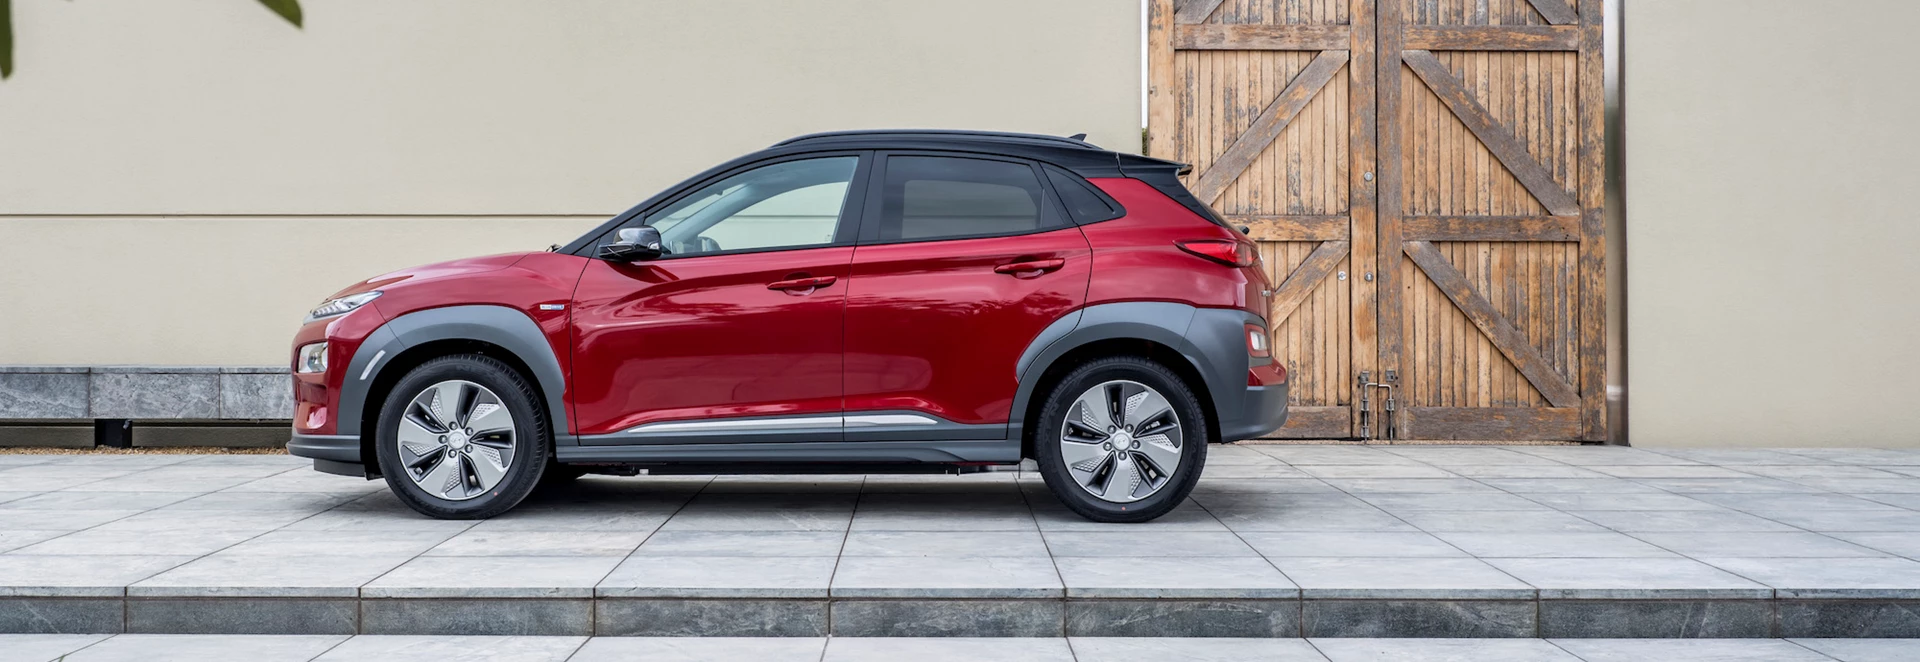 First details of updated Hyundai KONA electric revealed